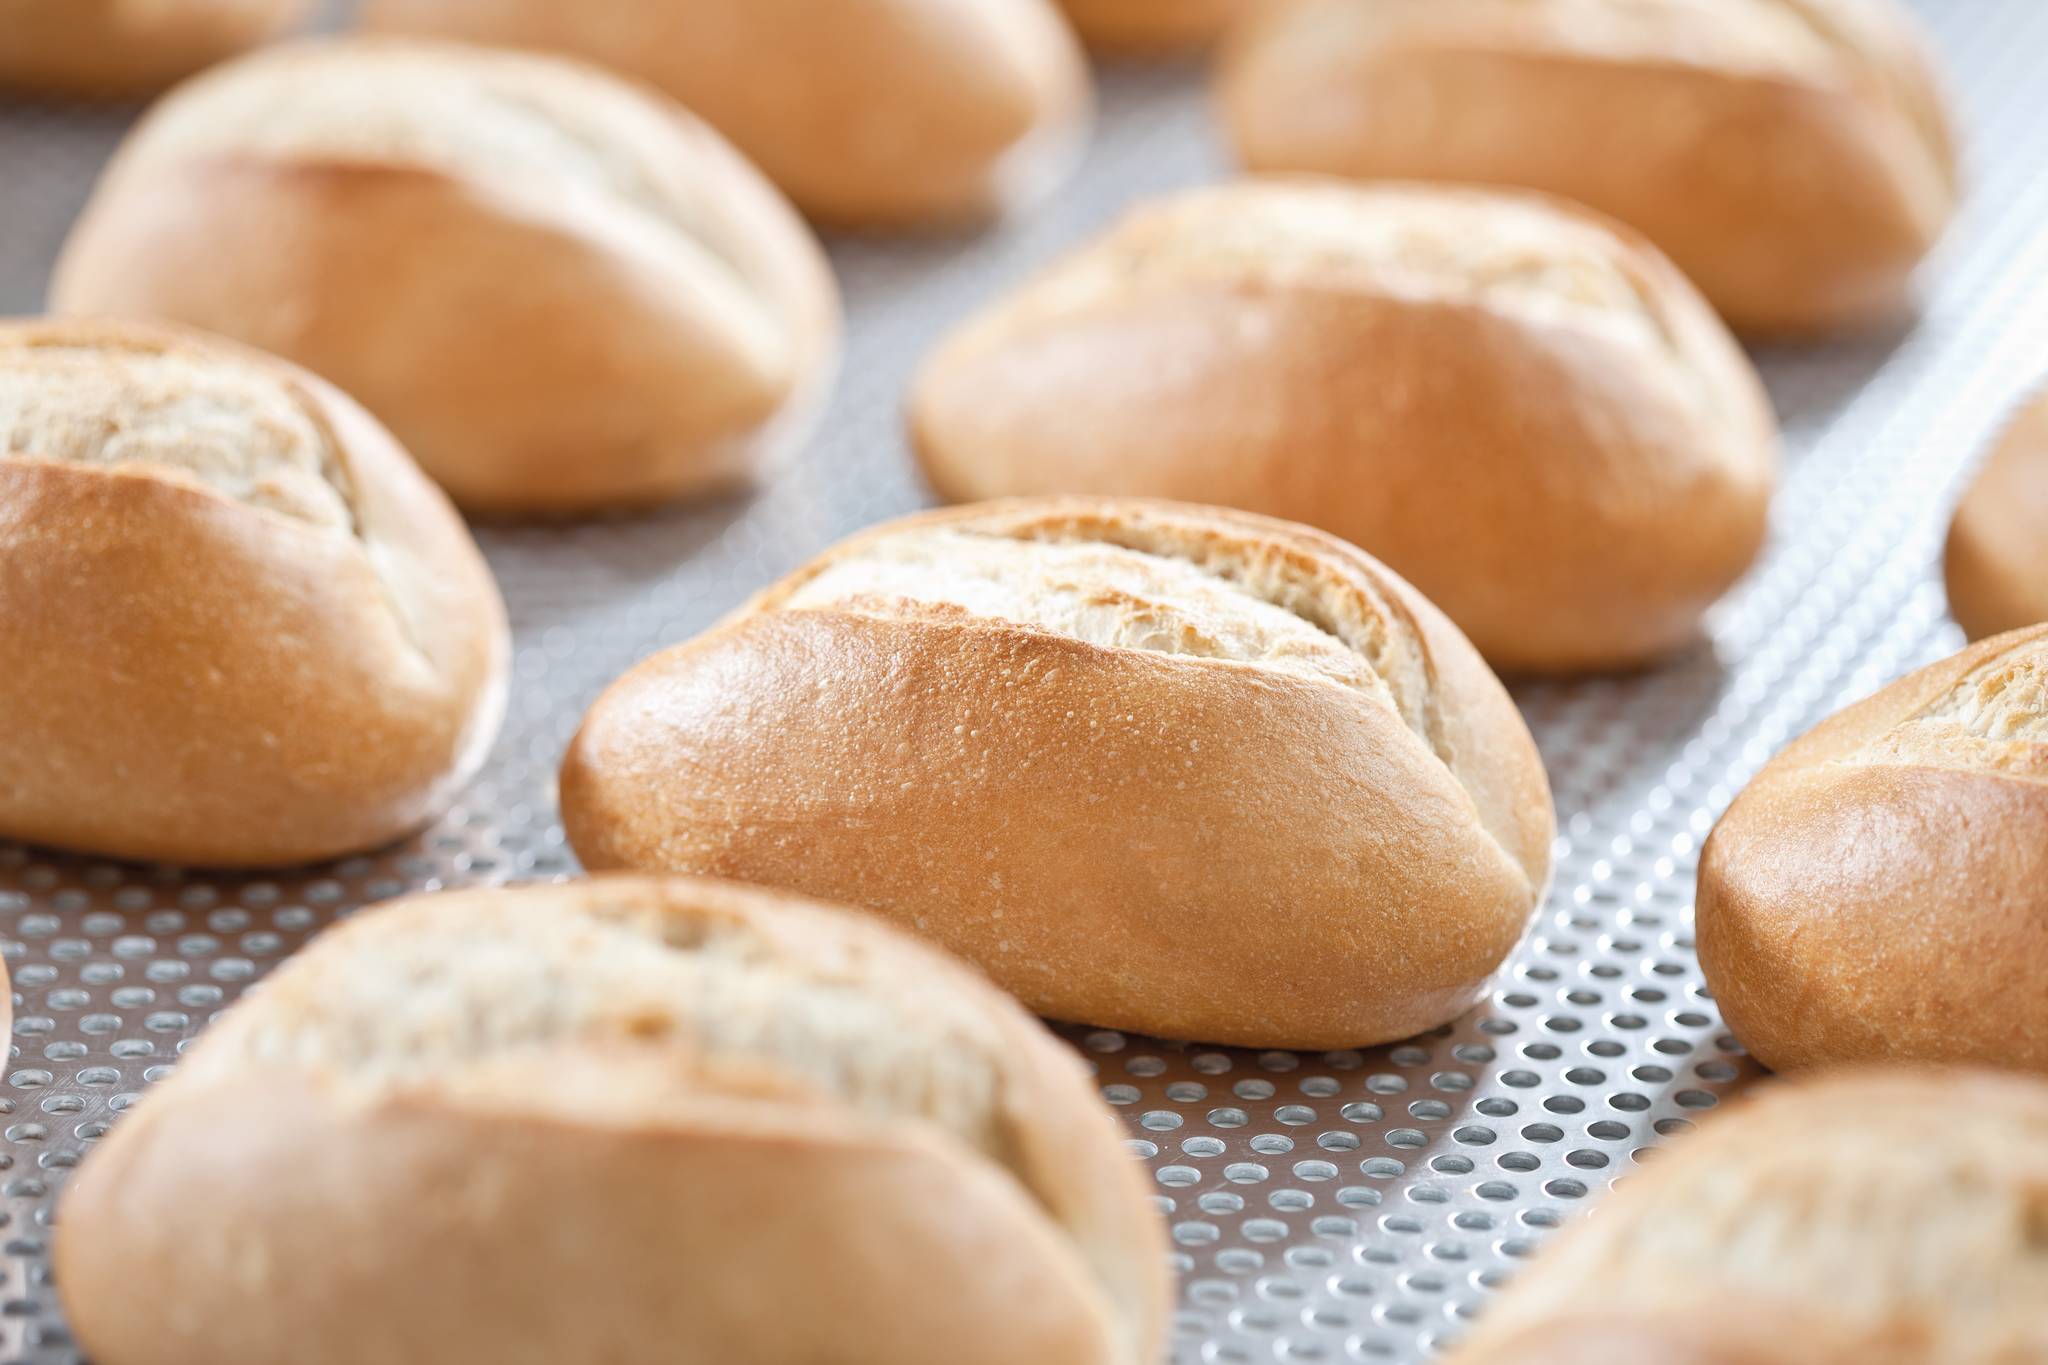 At a large industrial bakery in the UK that produces a wide variety of products, the plant’s liquid improvement system demands accurate doses of additives into dough mixtures.